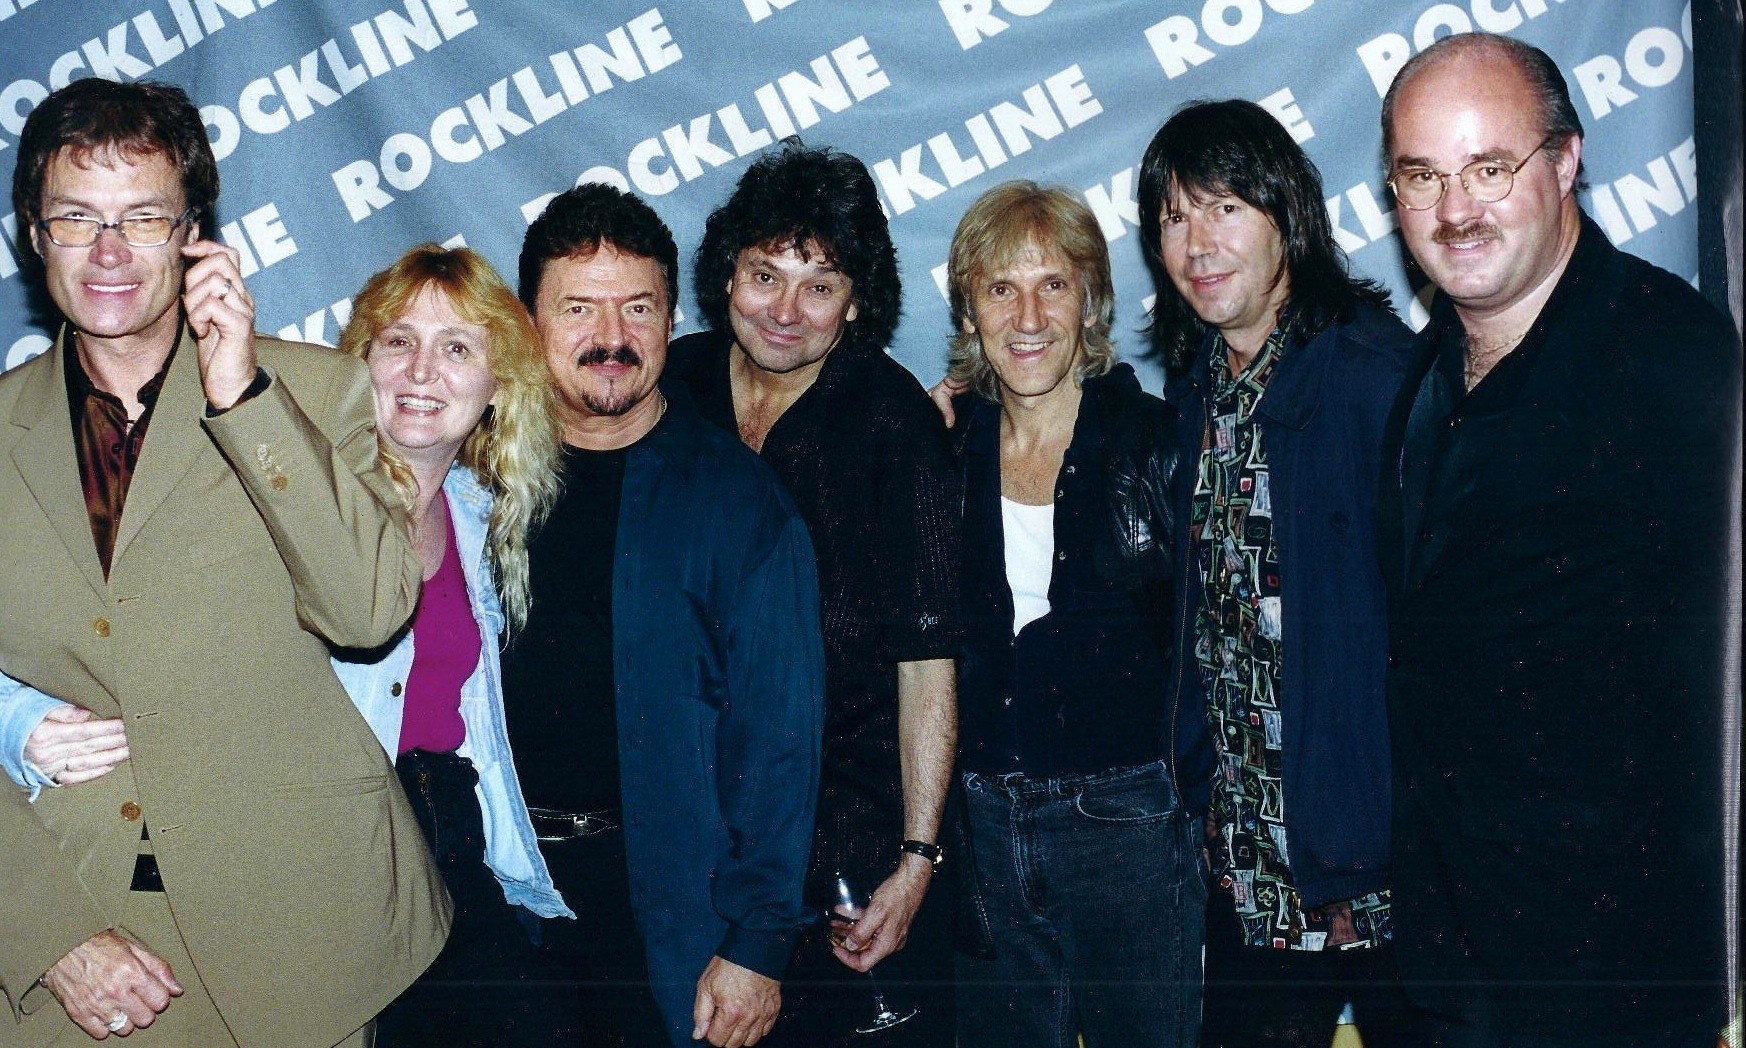 Charlie Schmitt with (from left to right) Glenn Hughes of Deep Purple, Bobby Kimball of Toto, Mickey Thomas of Starship, John Cafferty of John Cafferty and The Beaver Brown Band, and Pat Travers